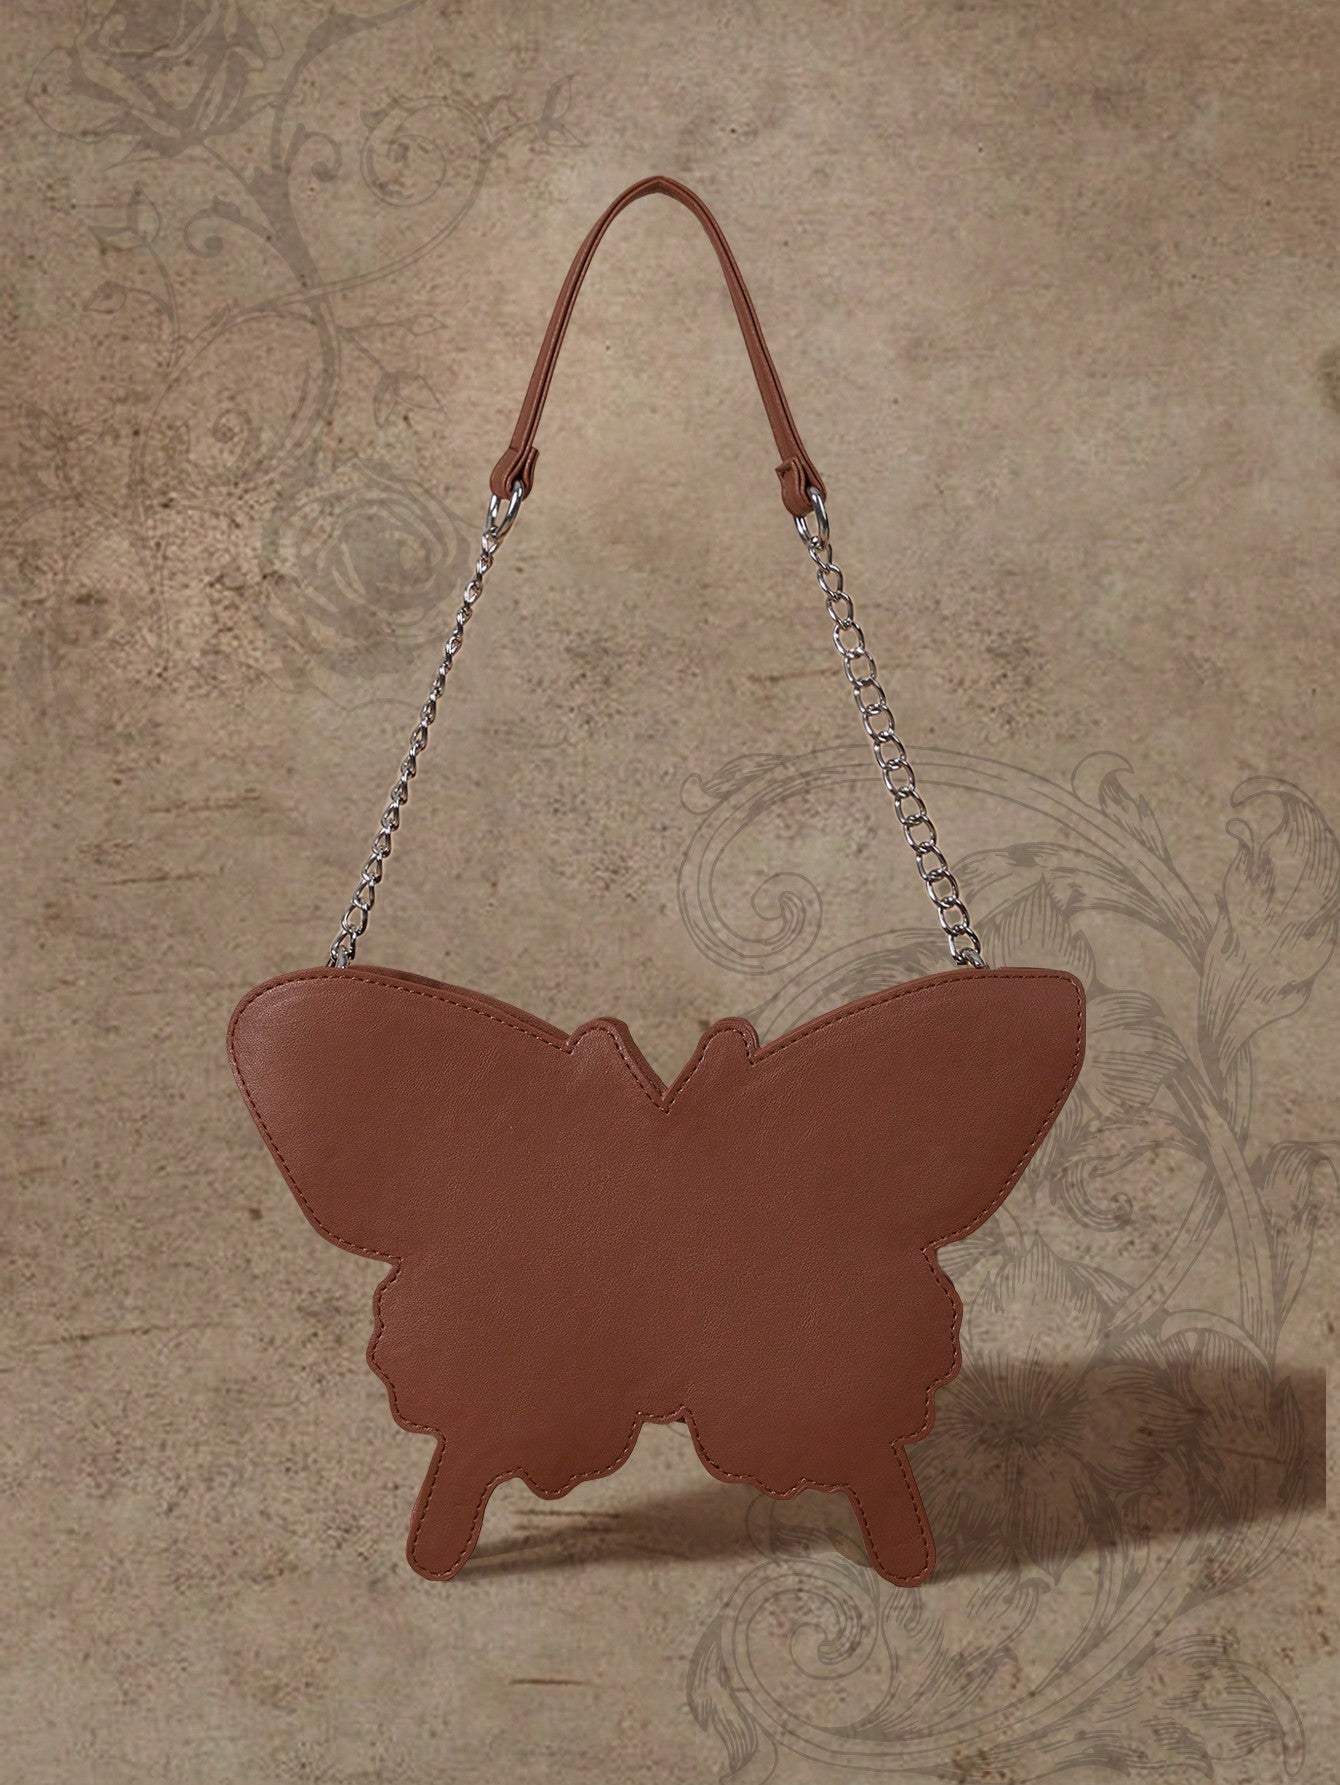 Fairycore Small Novelty Bag Fashion Butterfly Design